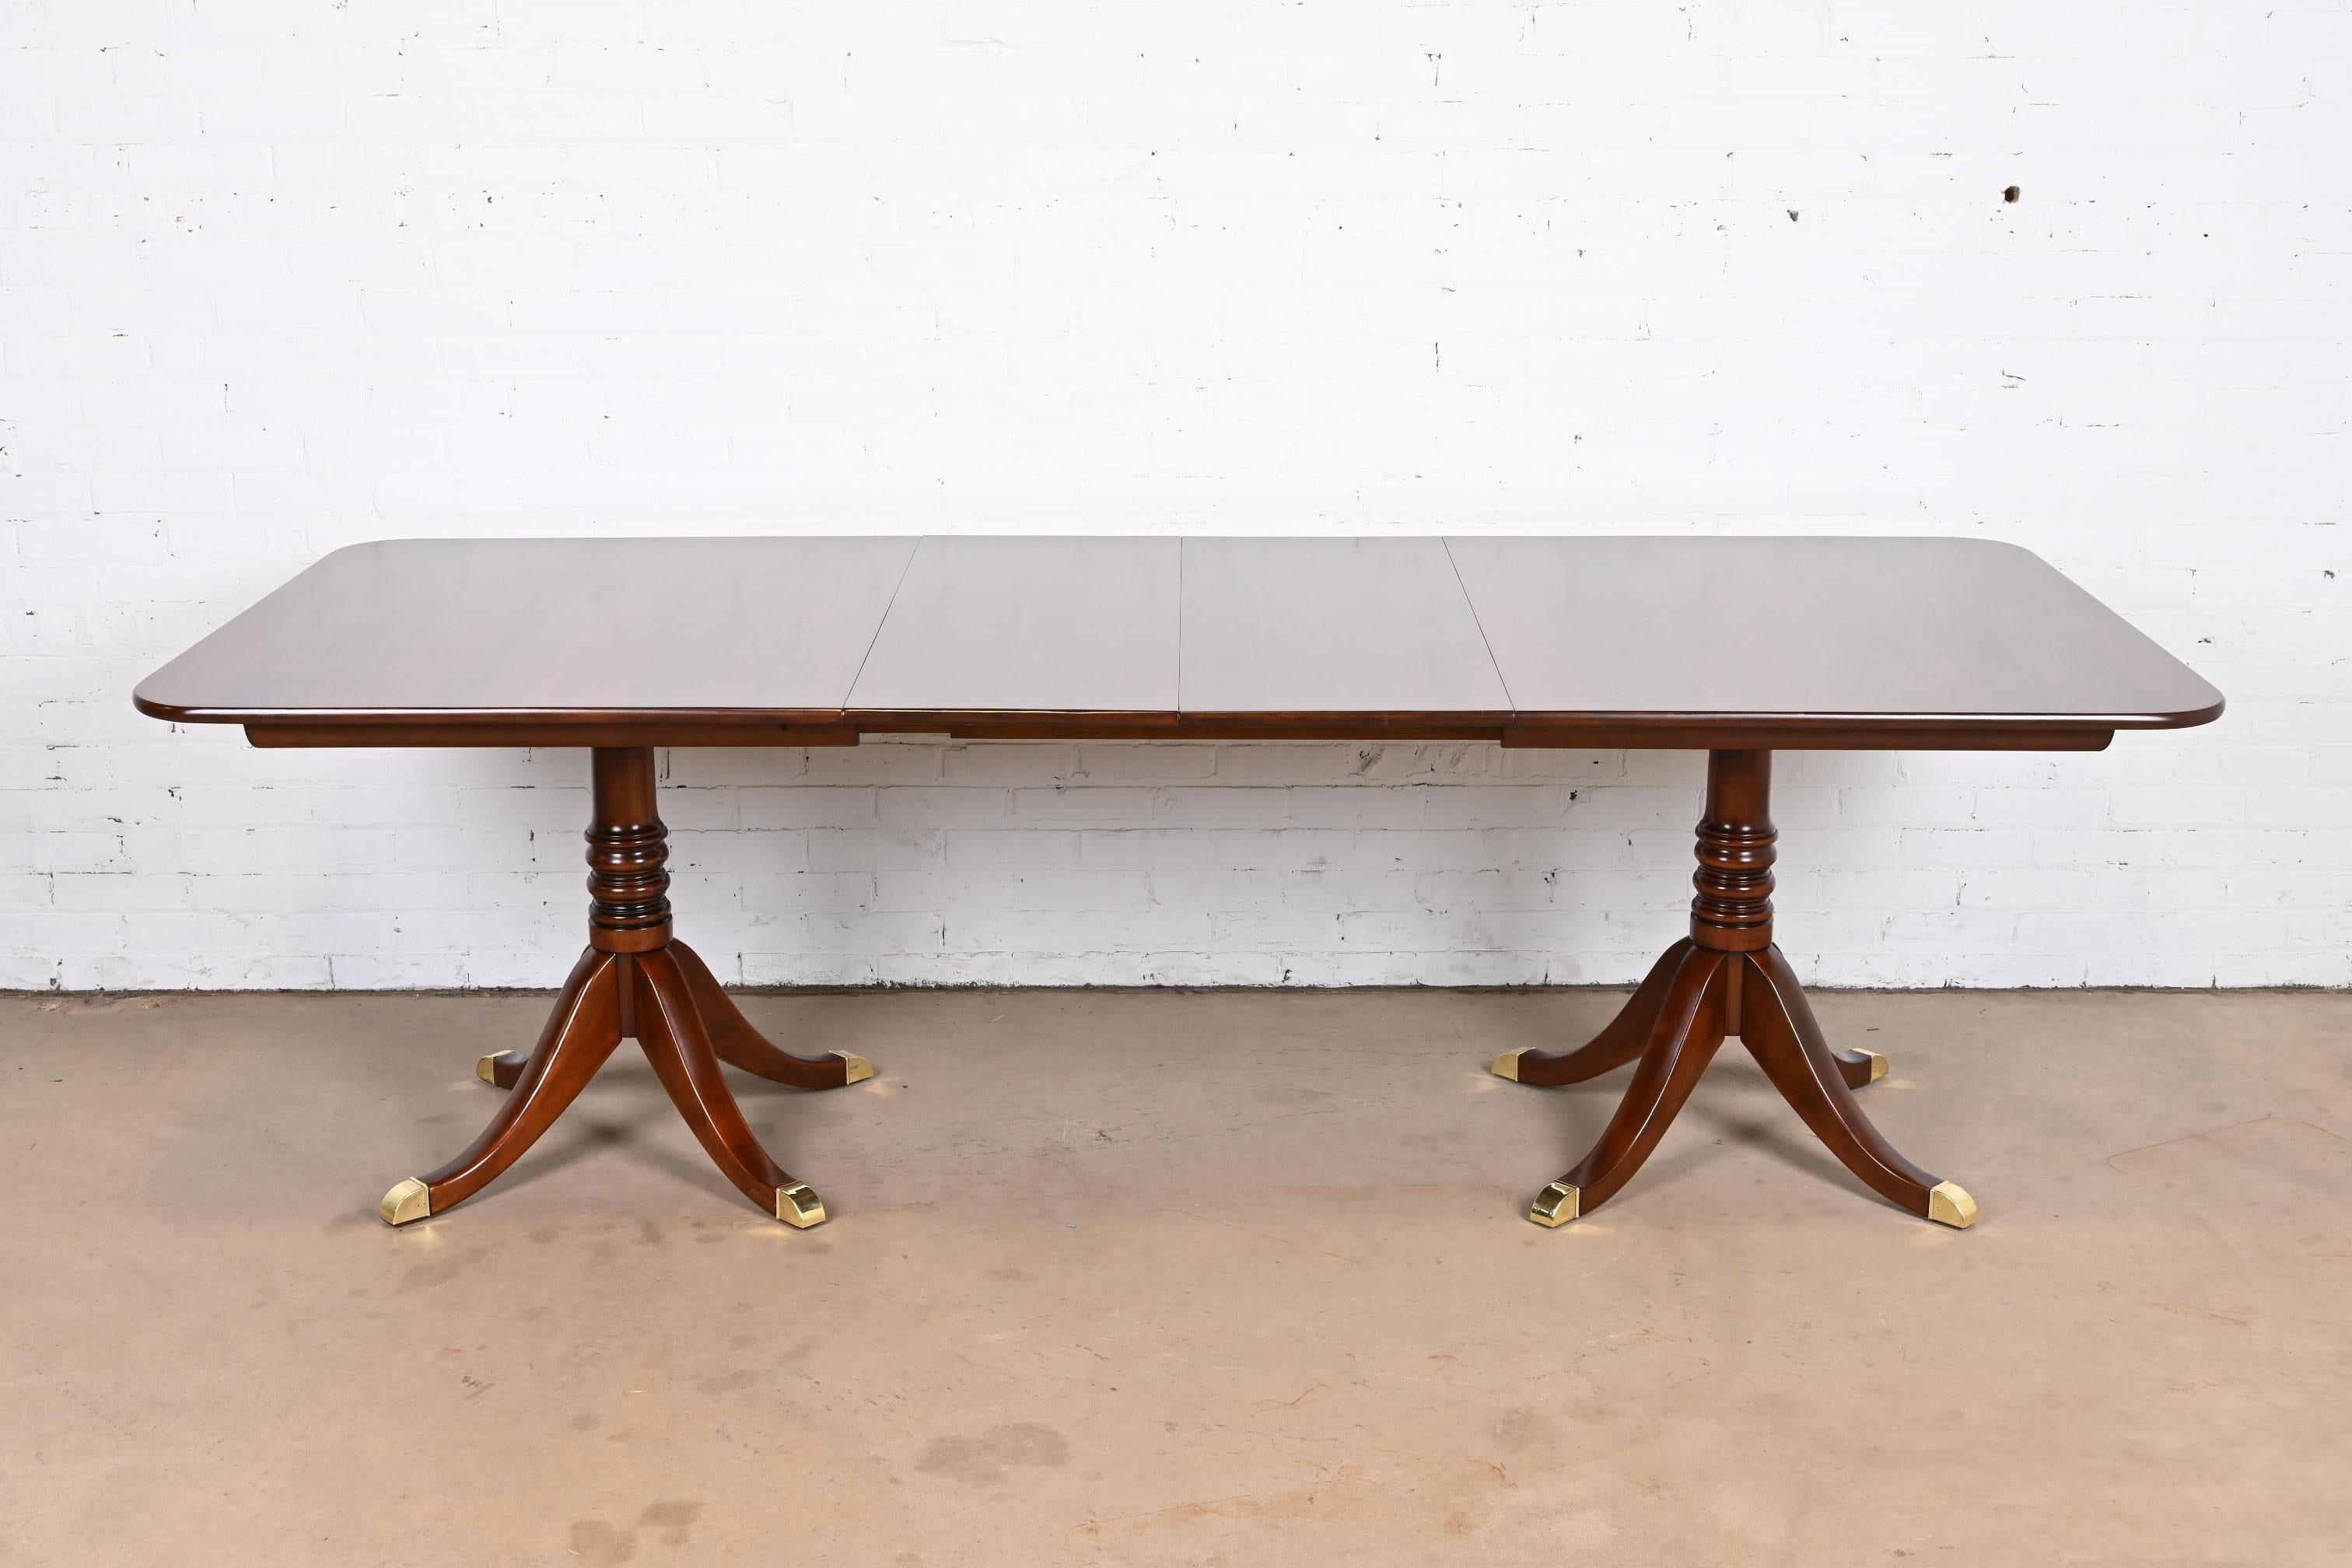 An exceptional Georgian or Regency style double pedestal extension dining table

By L &J.G. Stickley

USA, Mid-20th Century

Carved solid cherry wood, with brass-capped feet.

Measures: 66.5